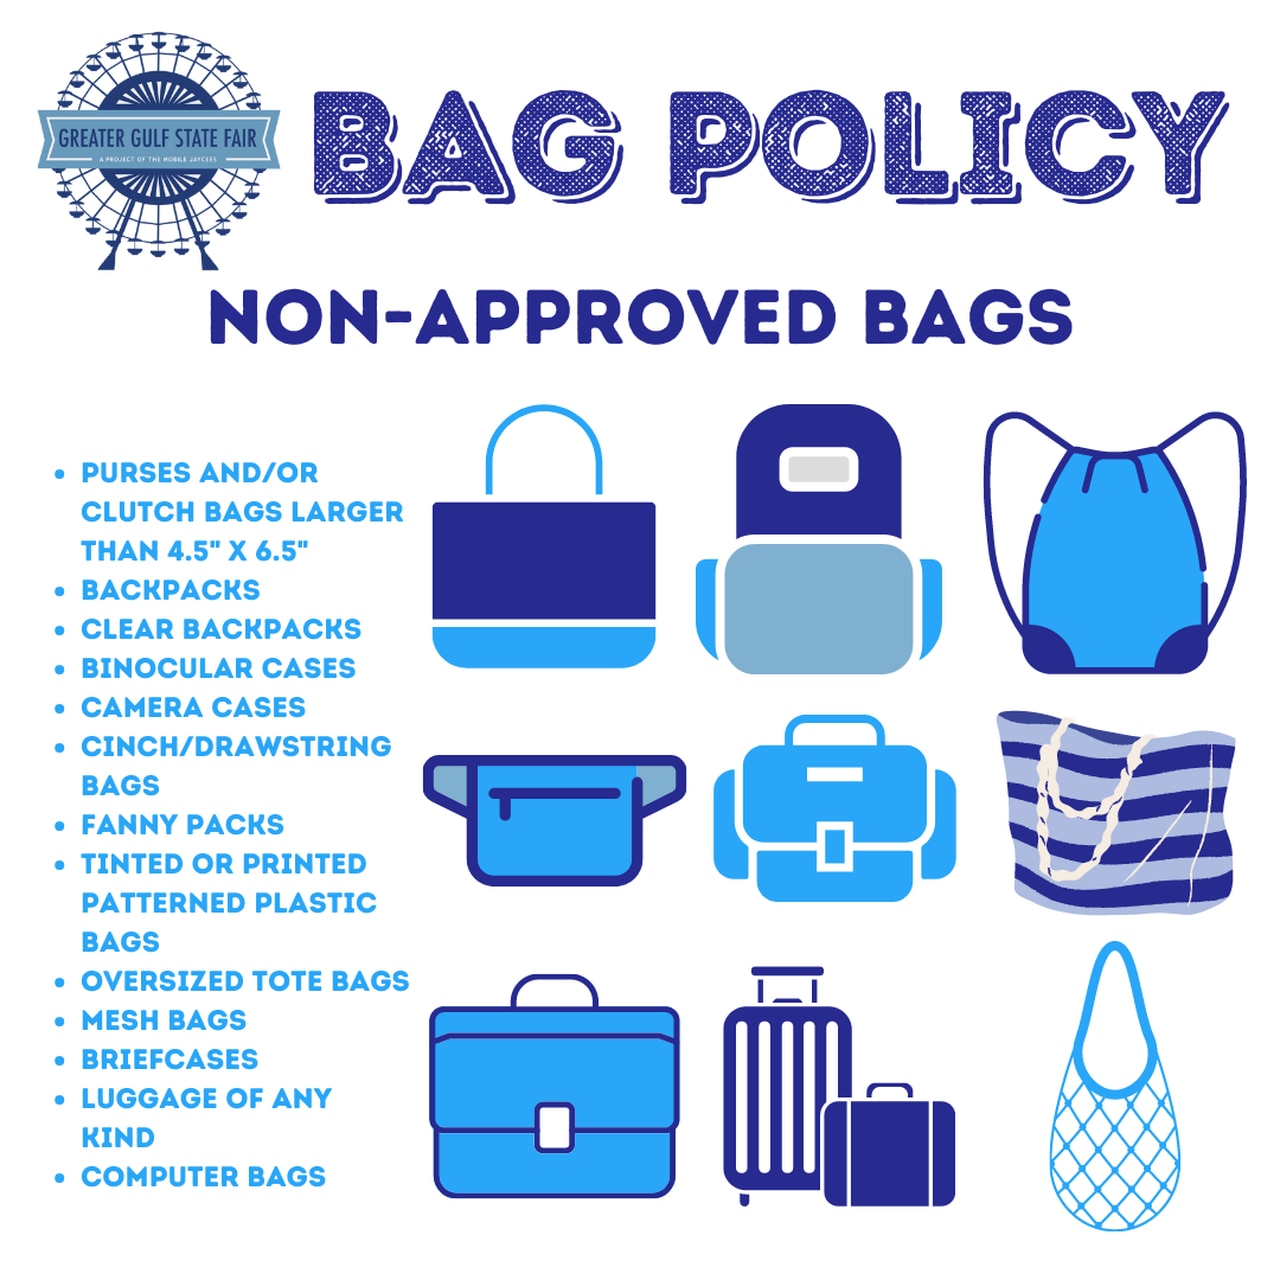 The Greater Gulf State Fair's clear bag policy rules out some bag options.